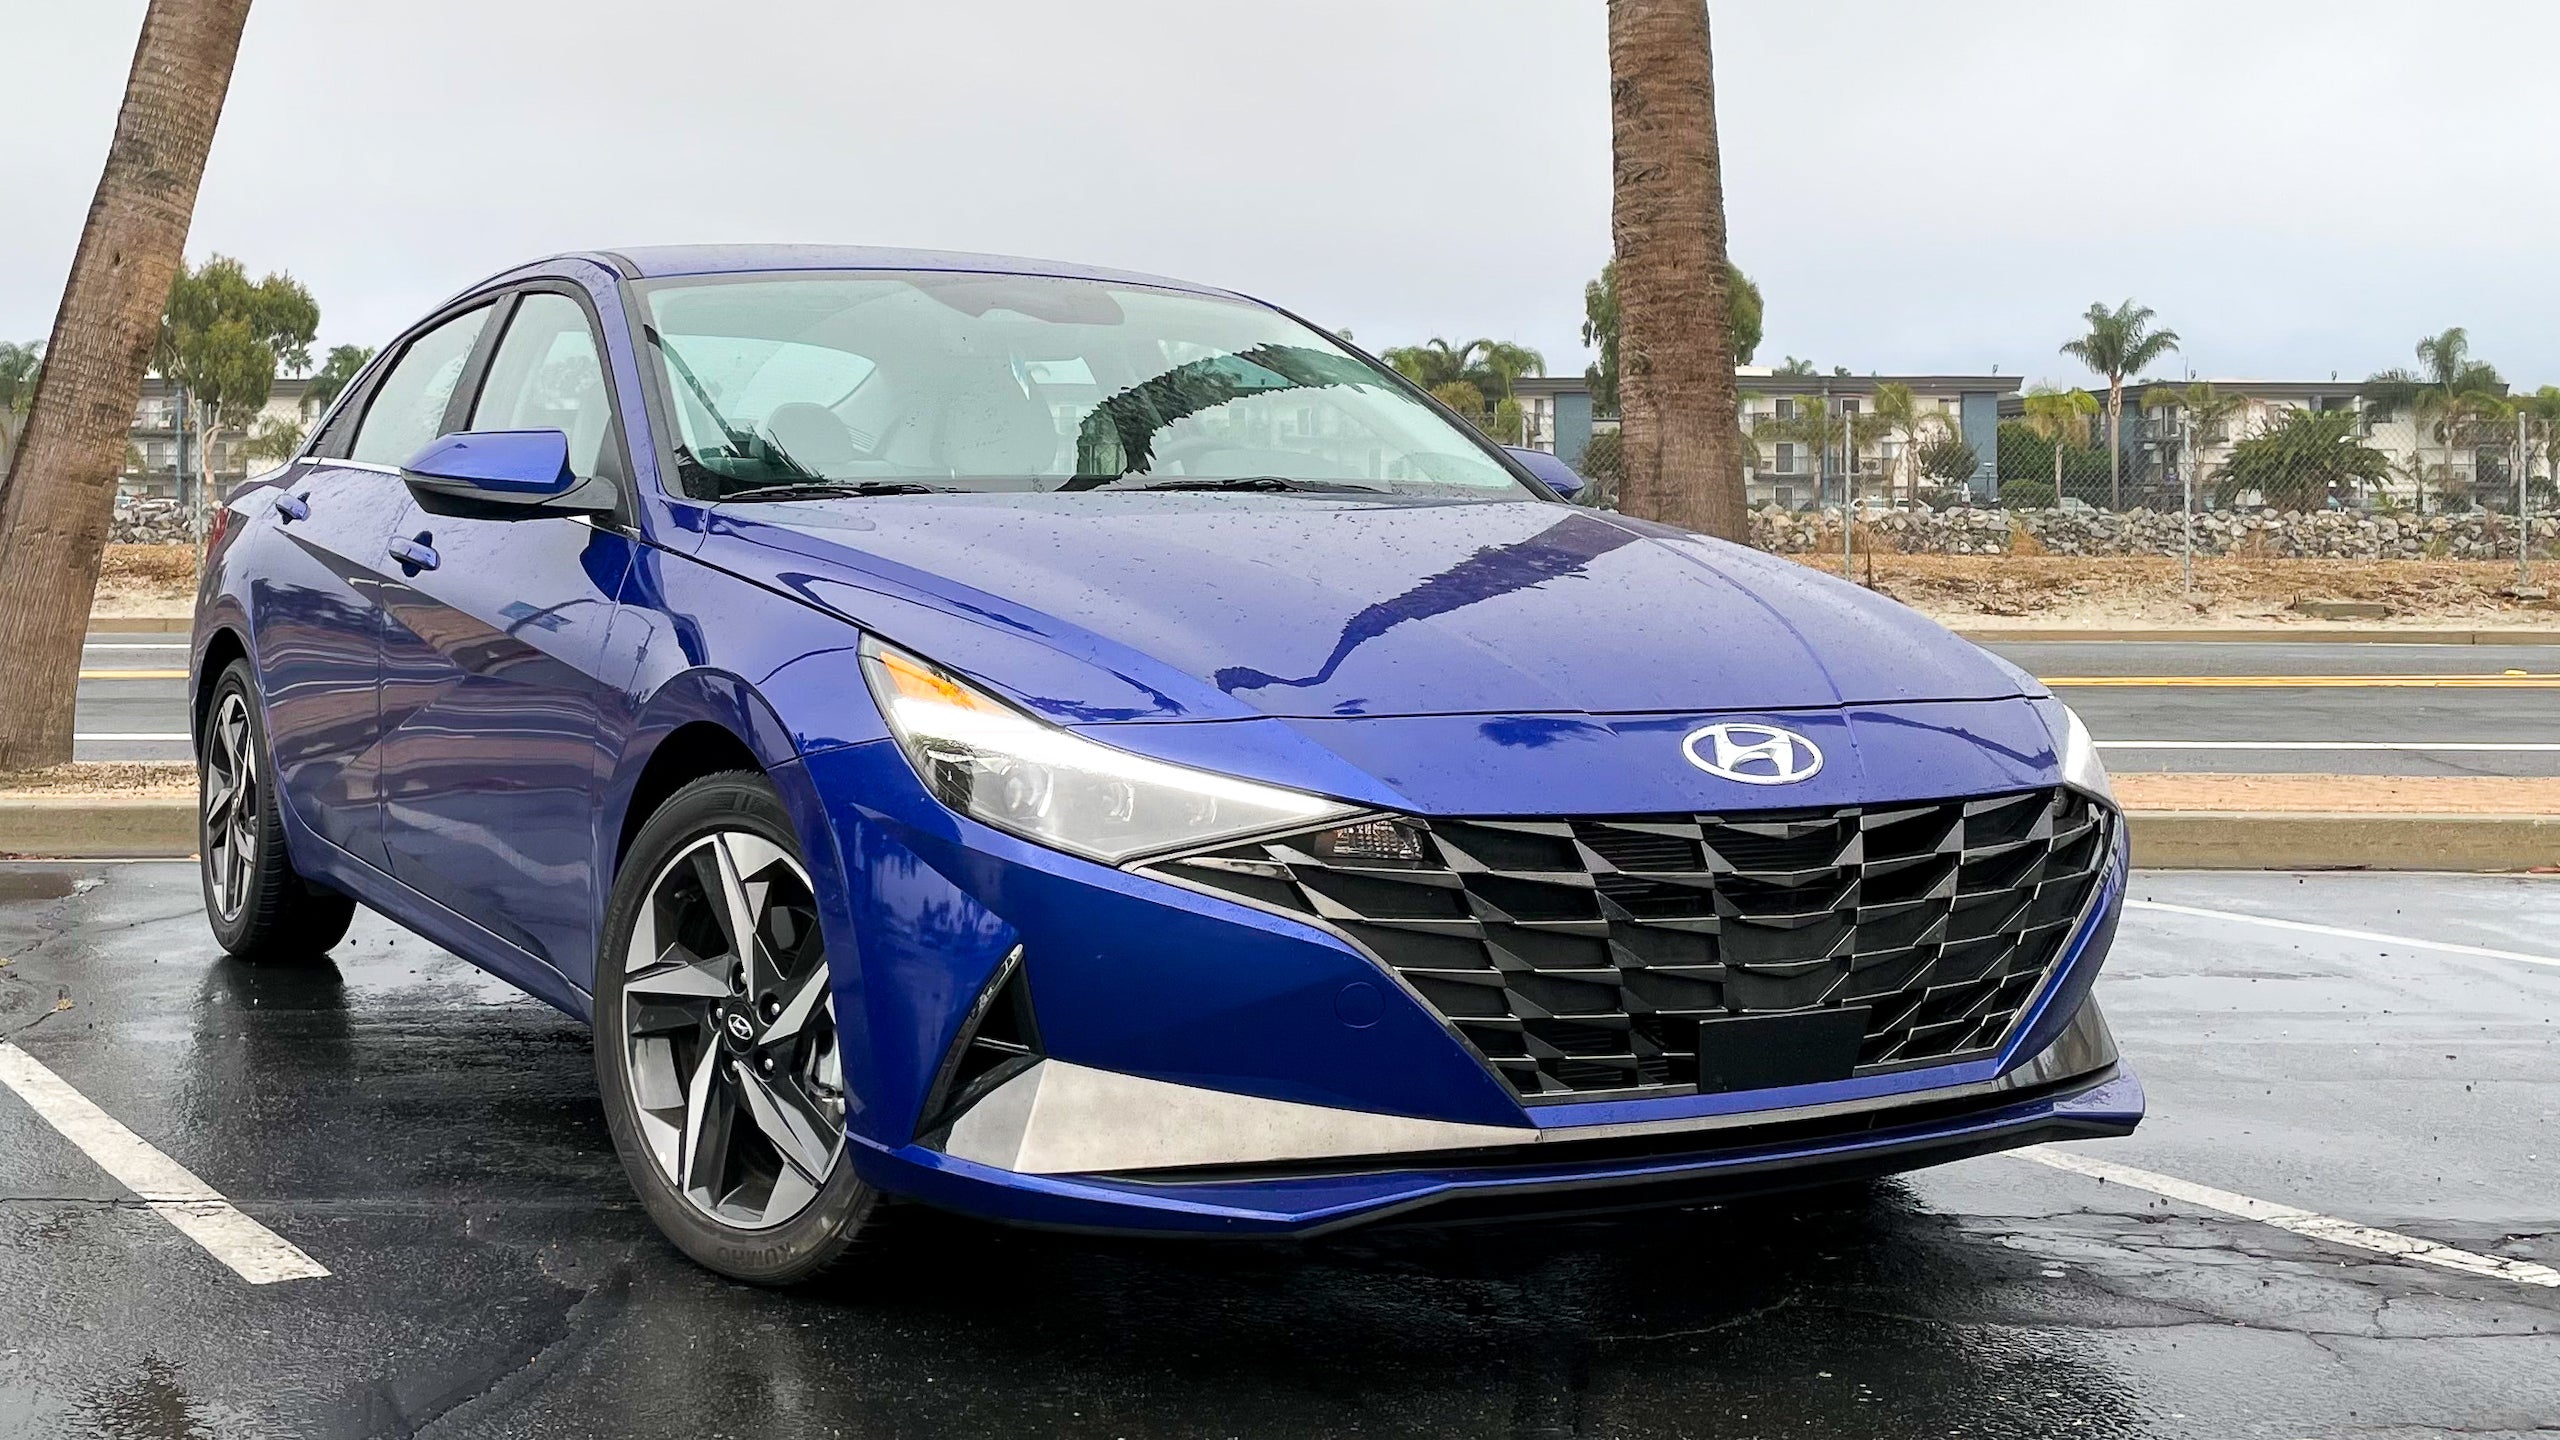 2023 Hyundai Elantra Review: Near Excellence in Affordable Compact Form